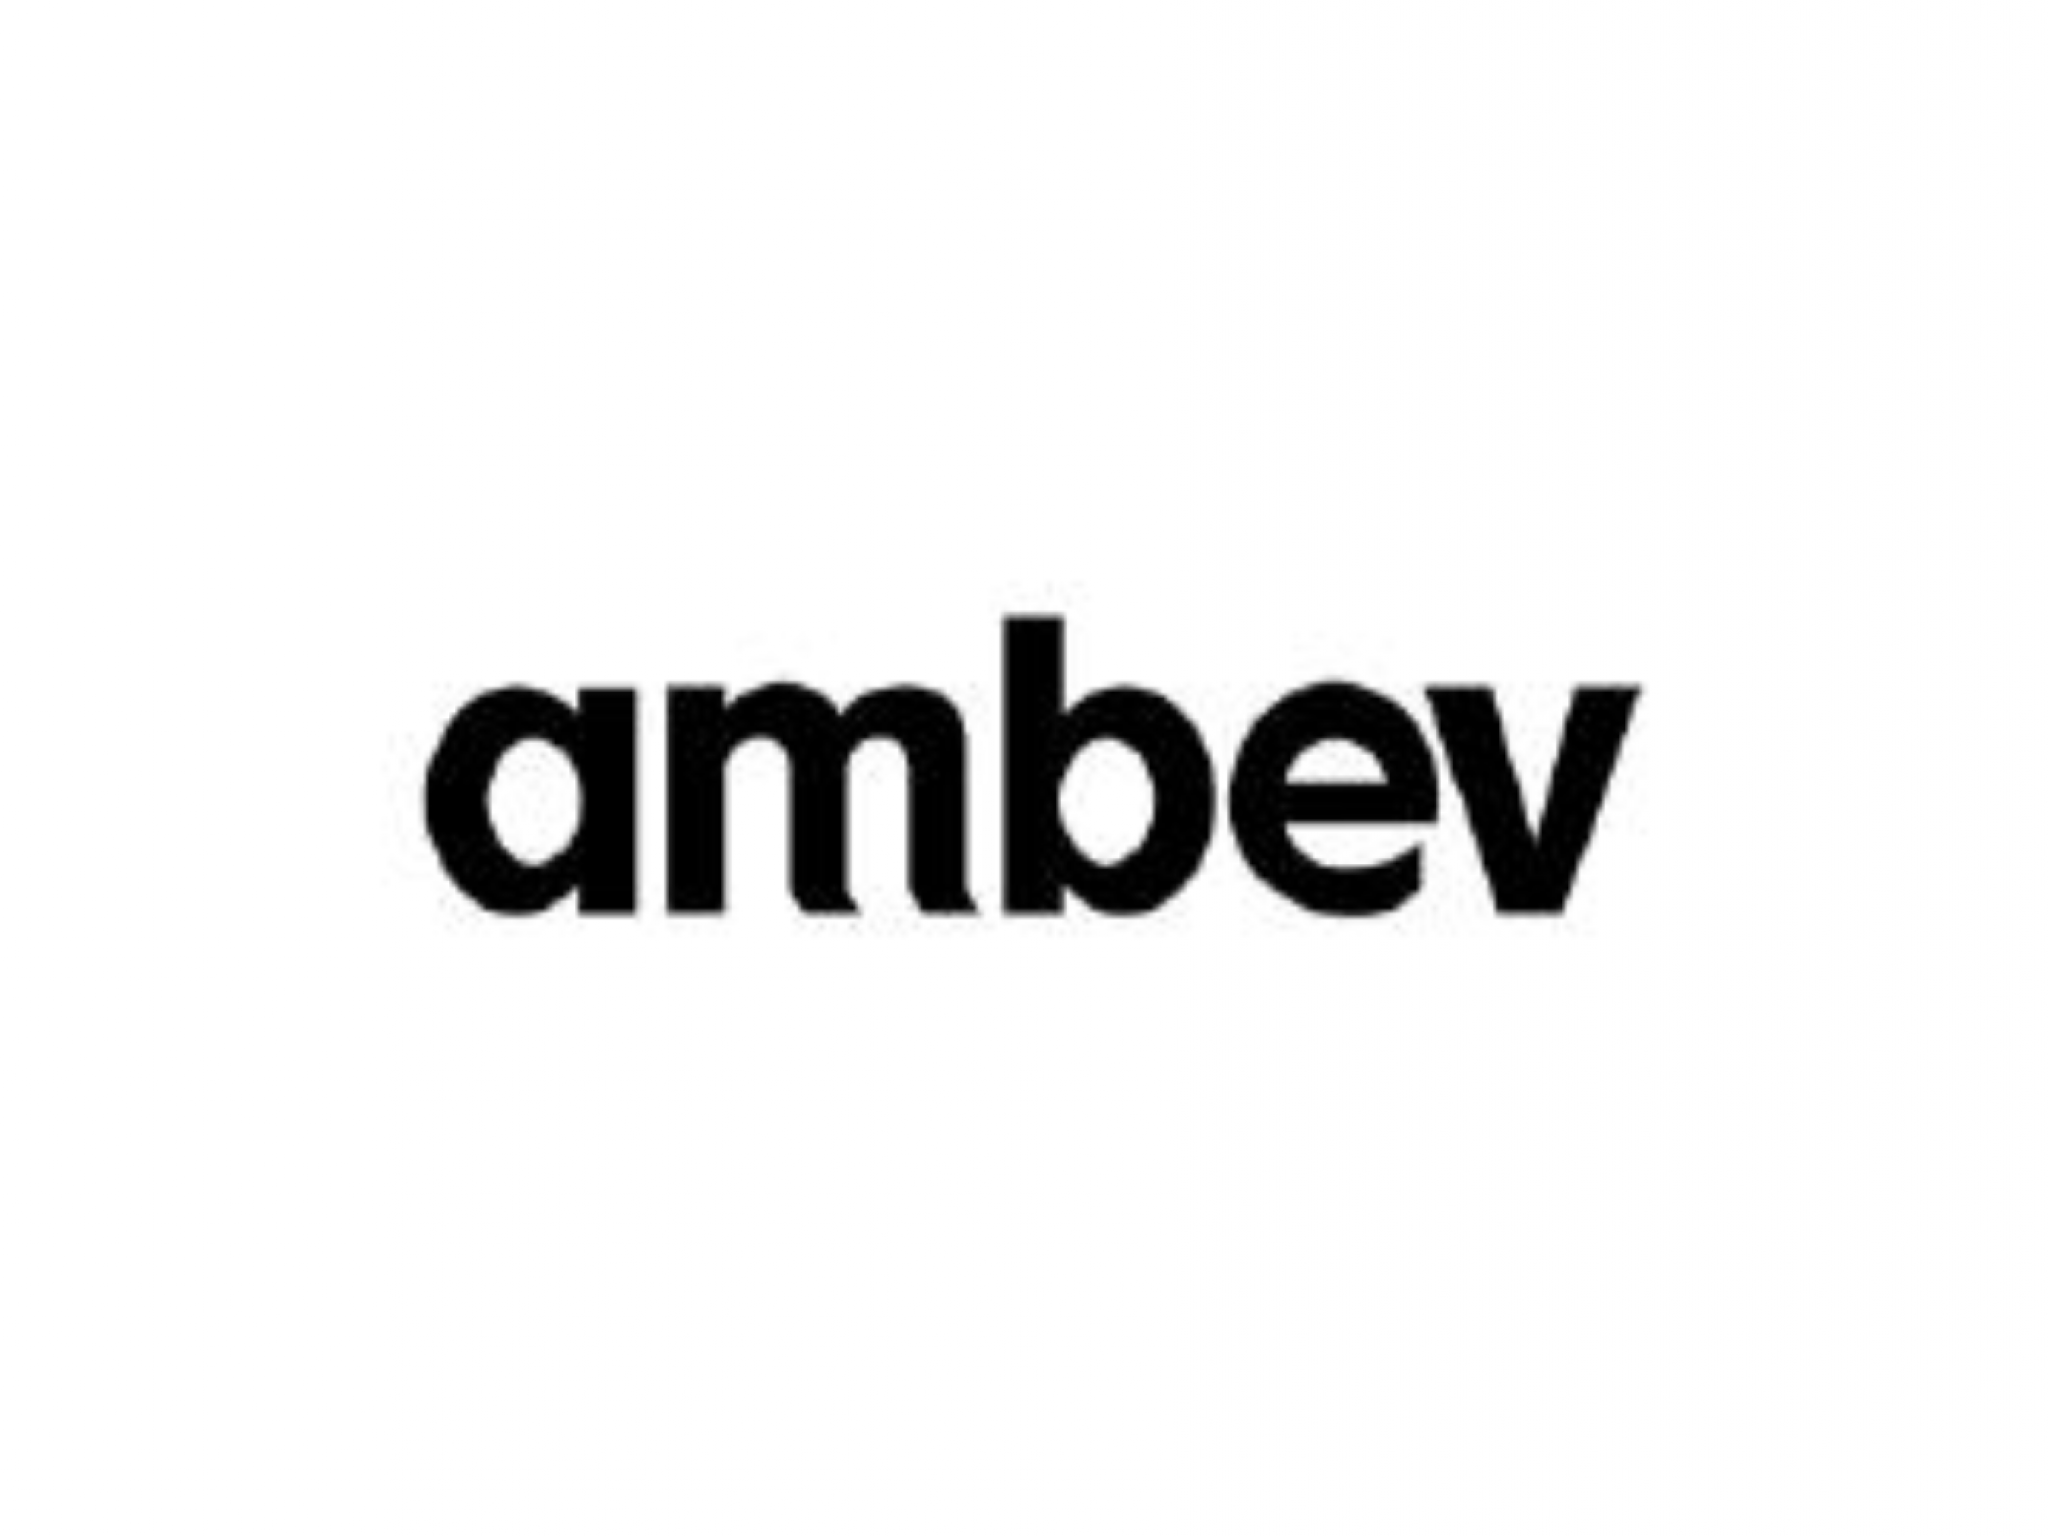  brazilian-beer-maker-ambev-clocks-higher-profit-in-q3-aided-by-fx--commodities-tailwinds 